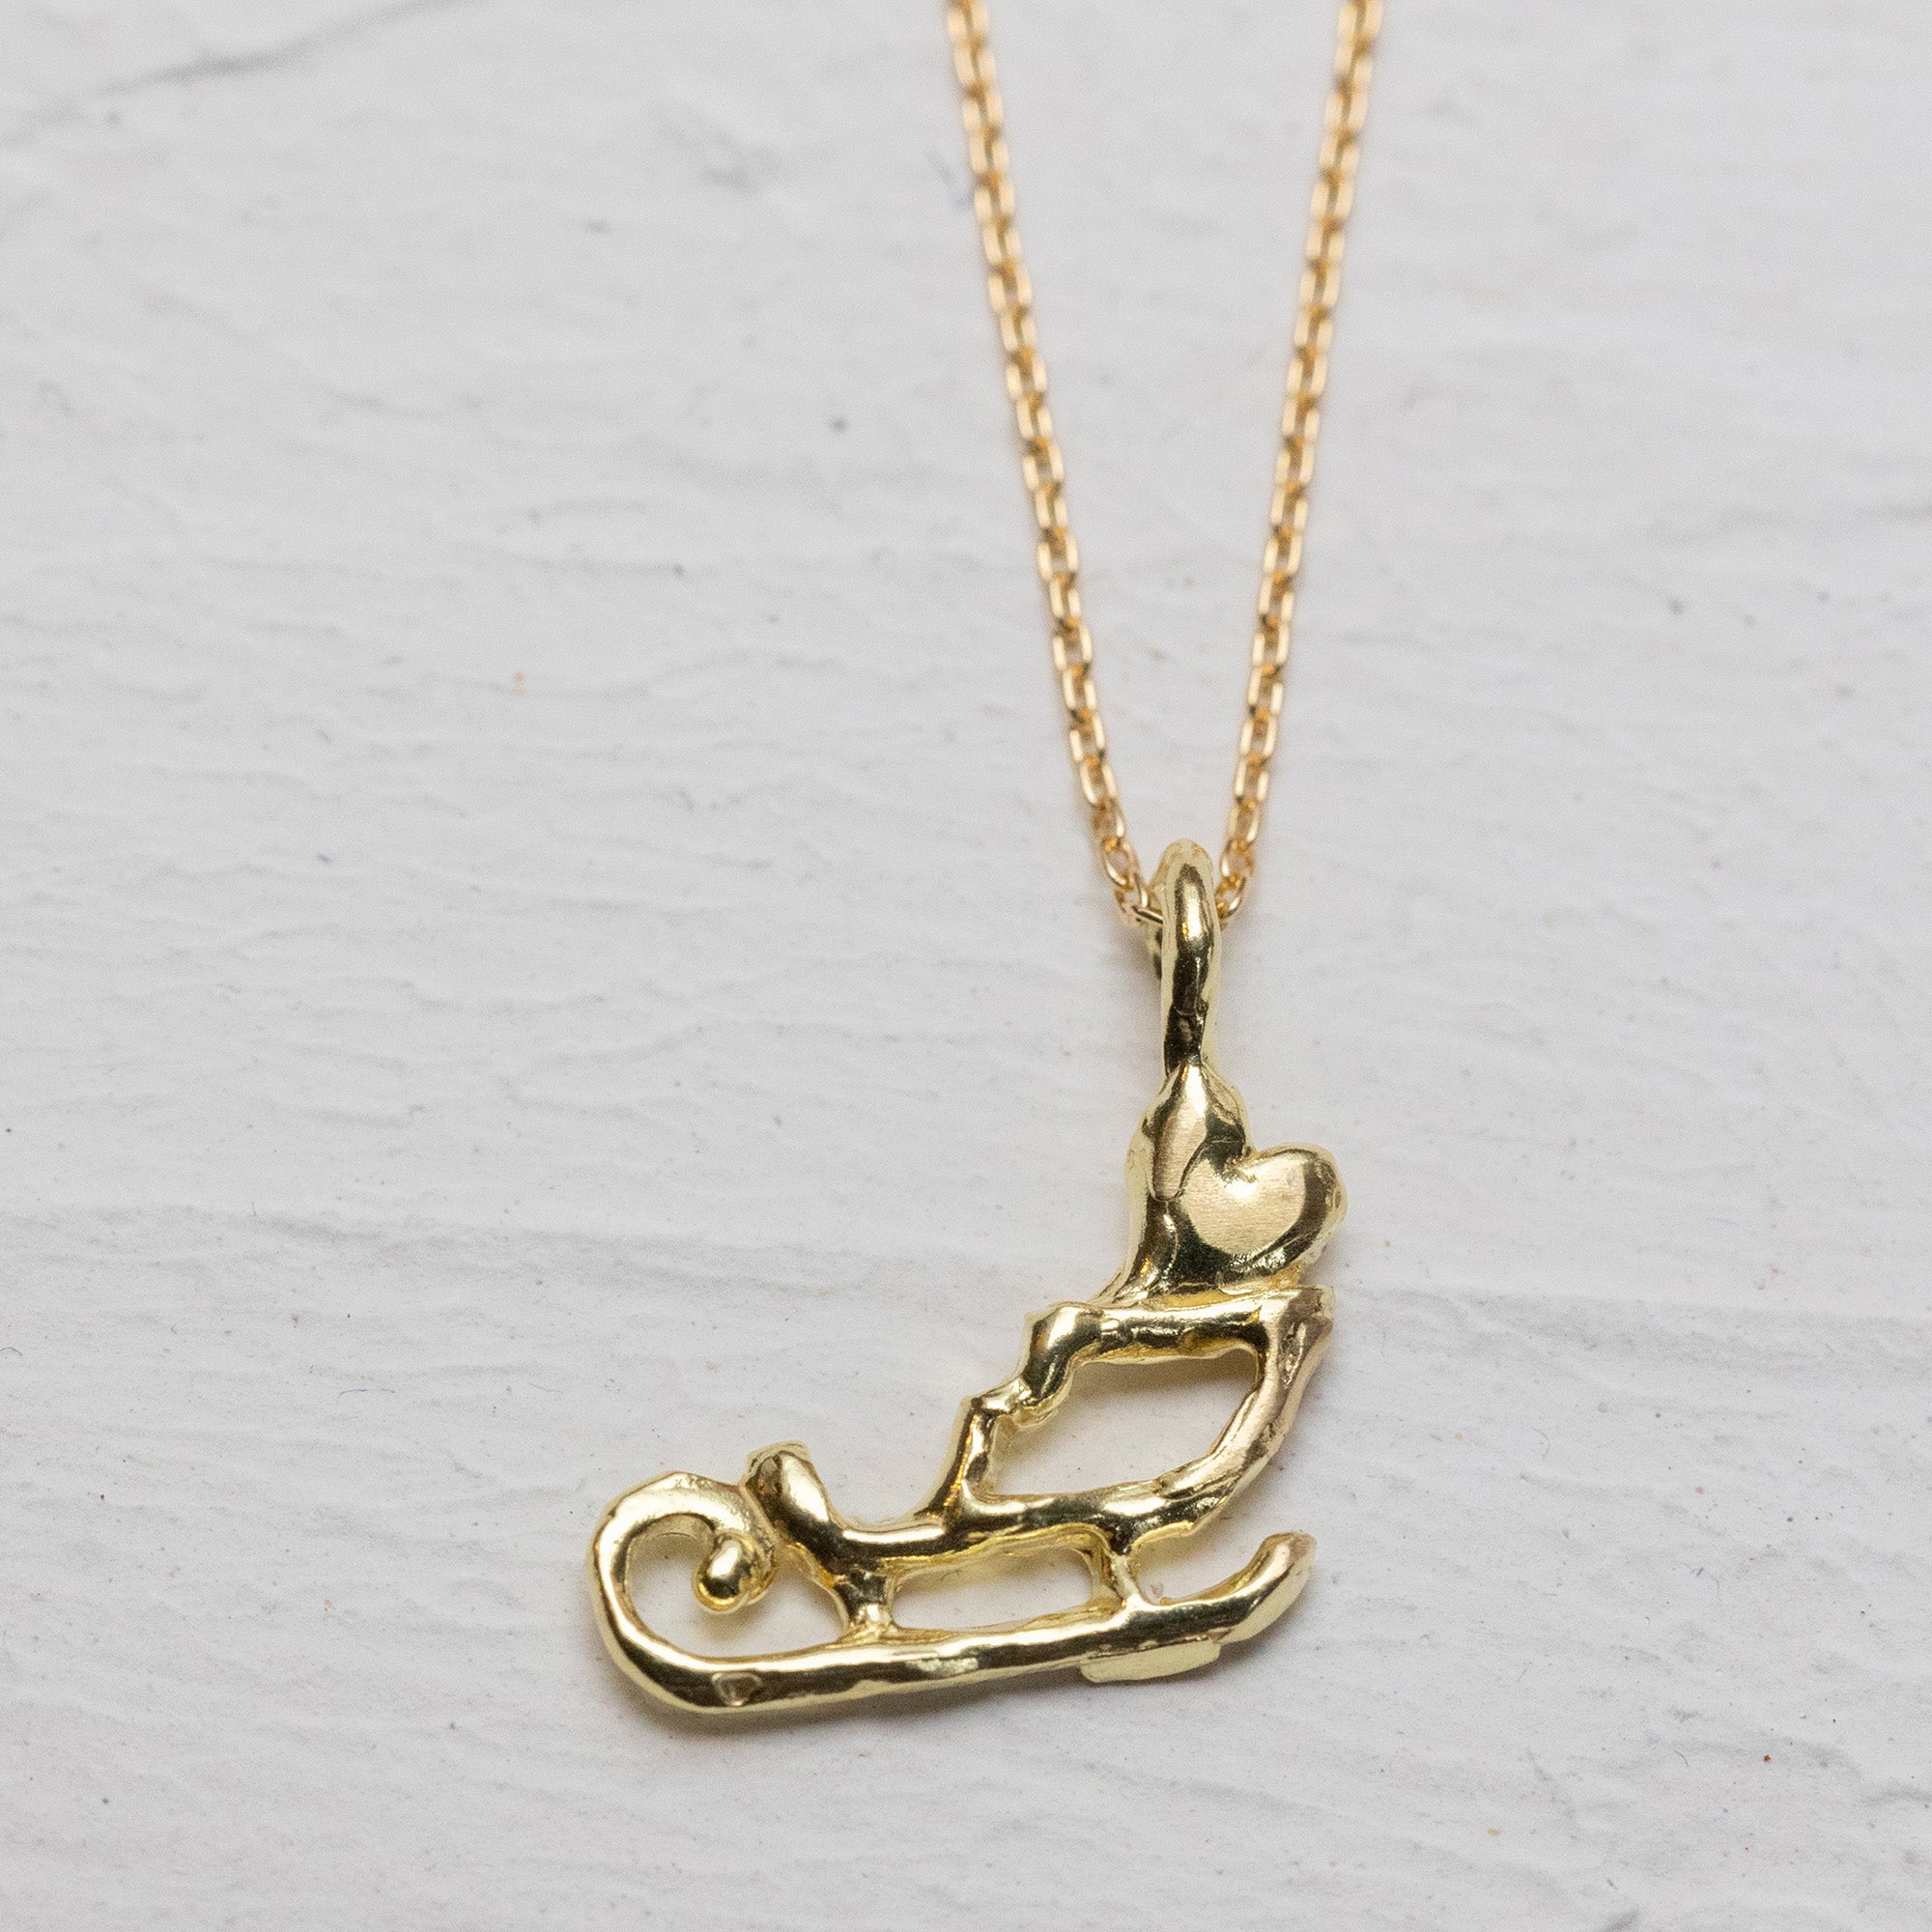 Delivering a Big Heart on a Sleigh 18k Gold Necklace